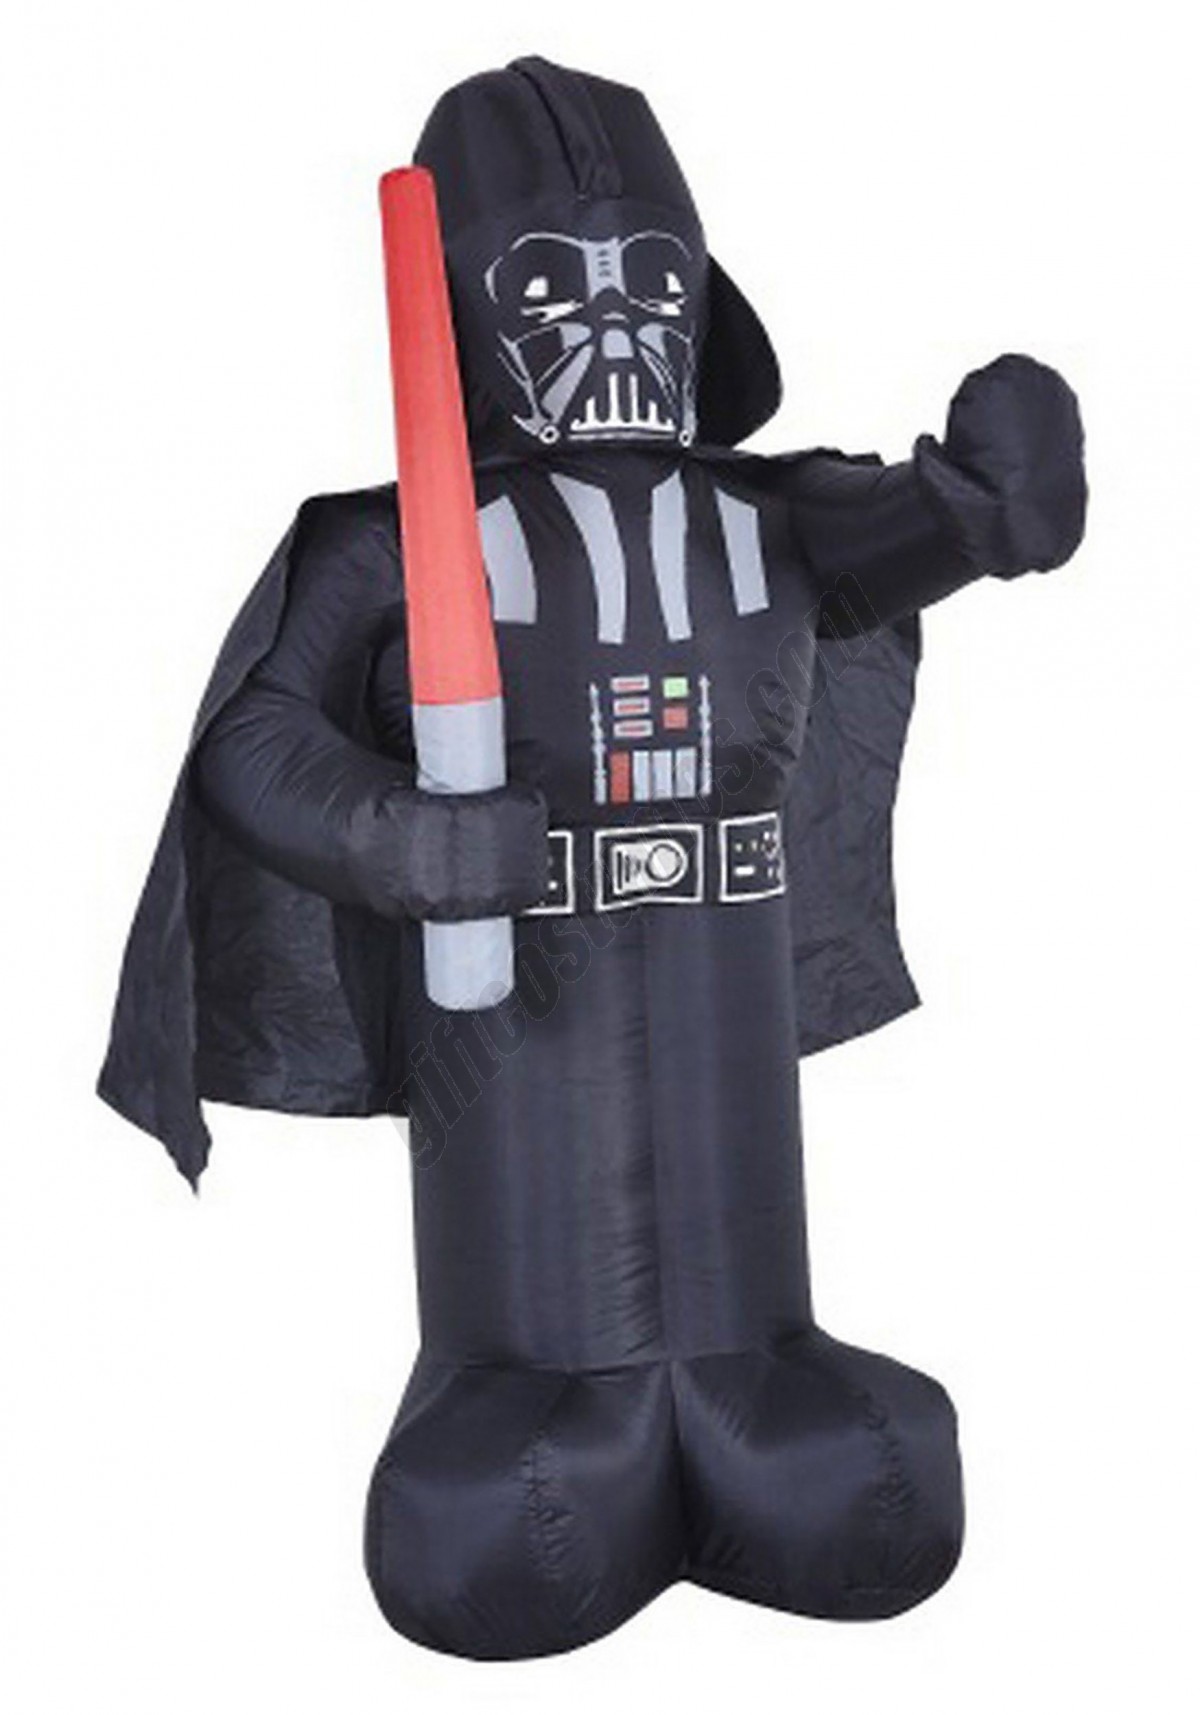 Star Wars Inflatable Darth Vader Decoration Promotions - -0